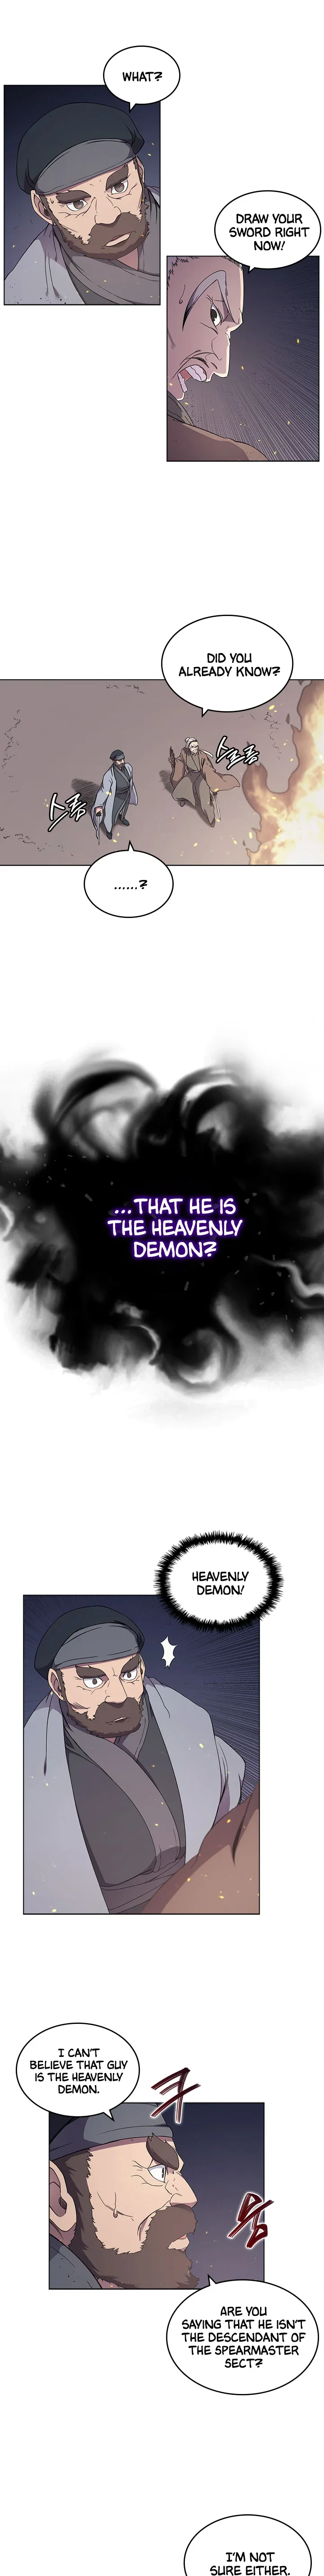 the-chronicles-of-heavenly-demon-chap-140-4